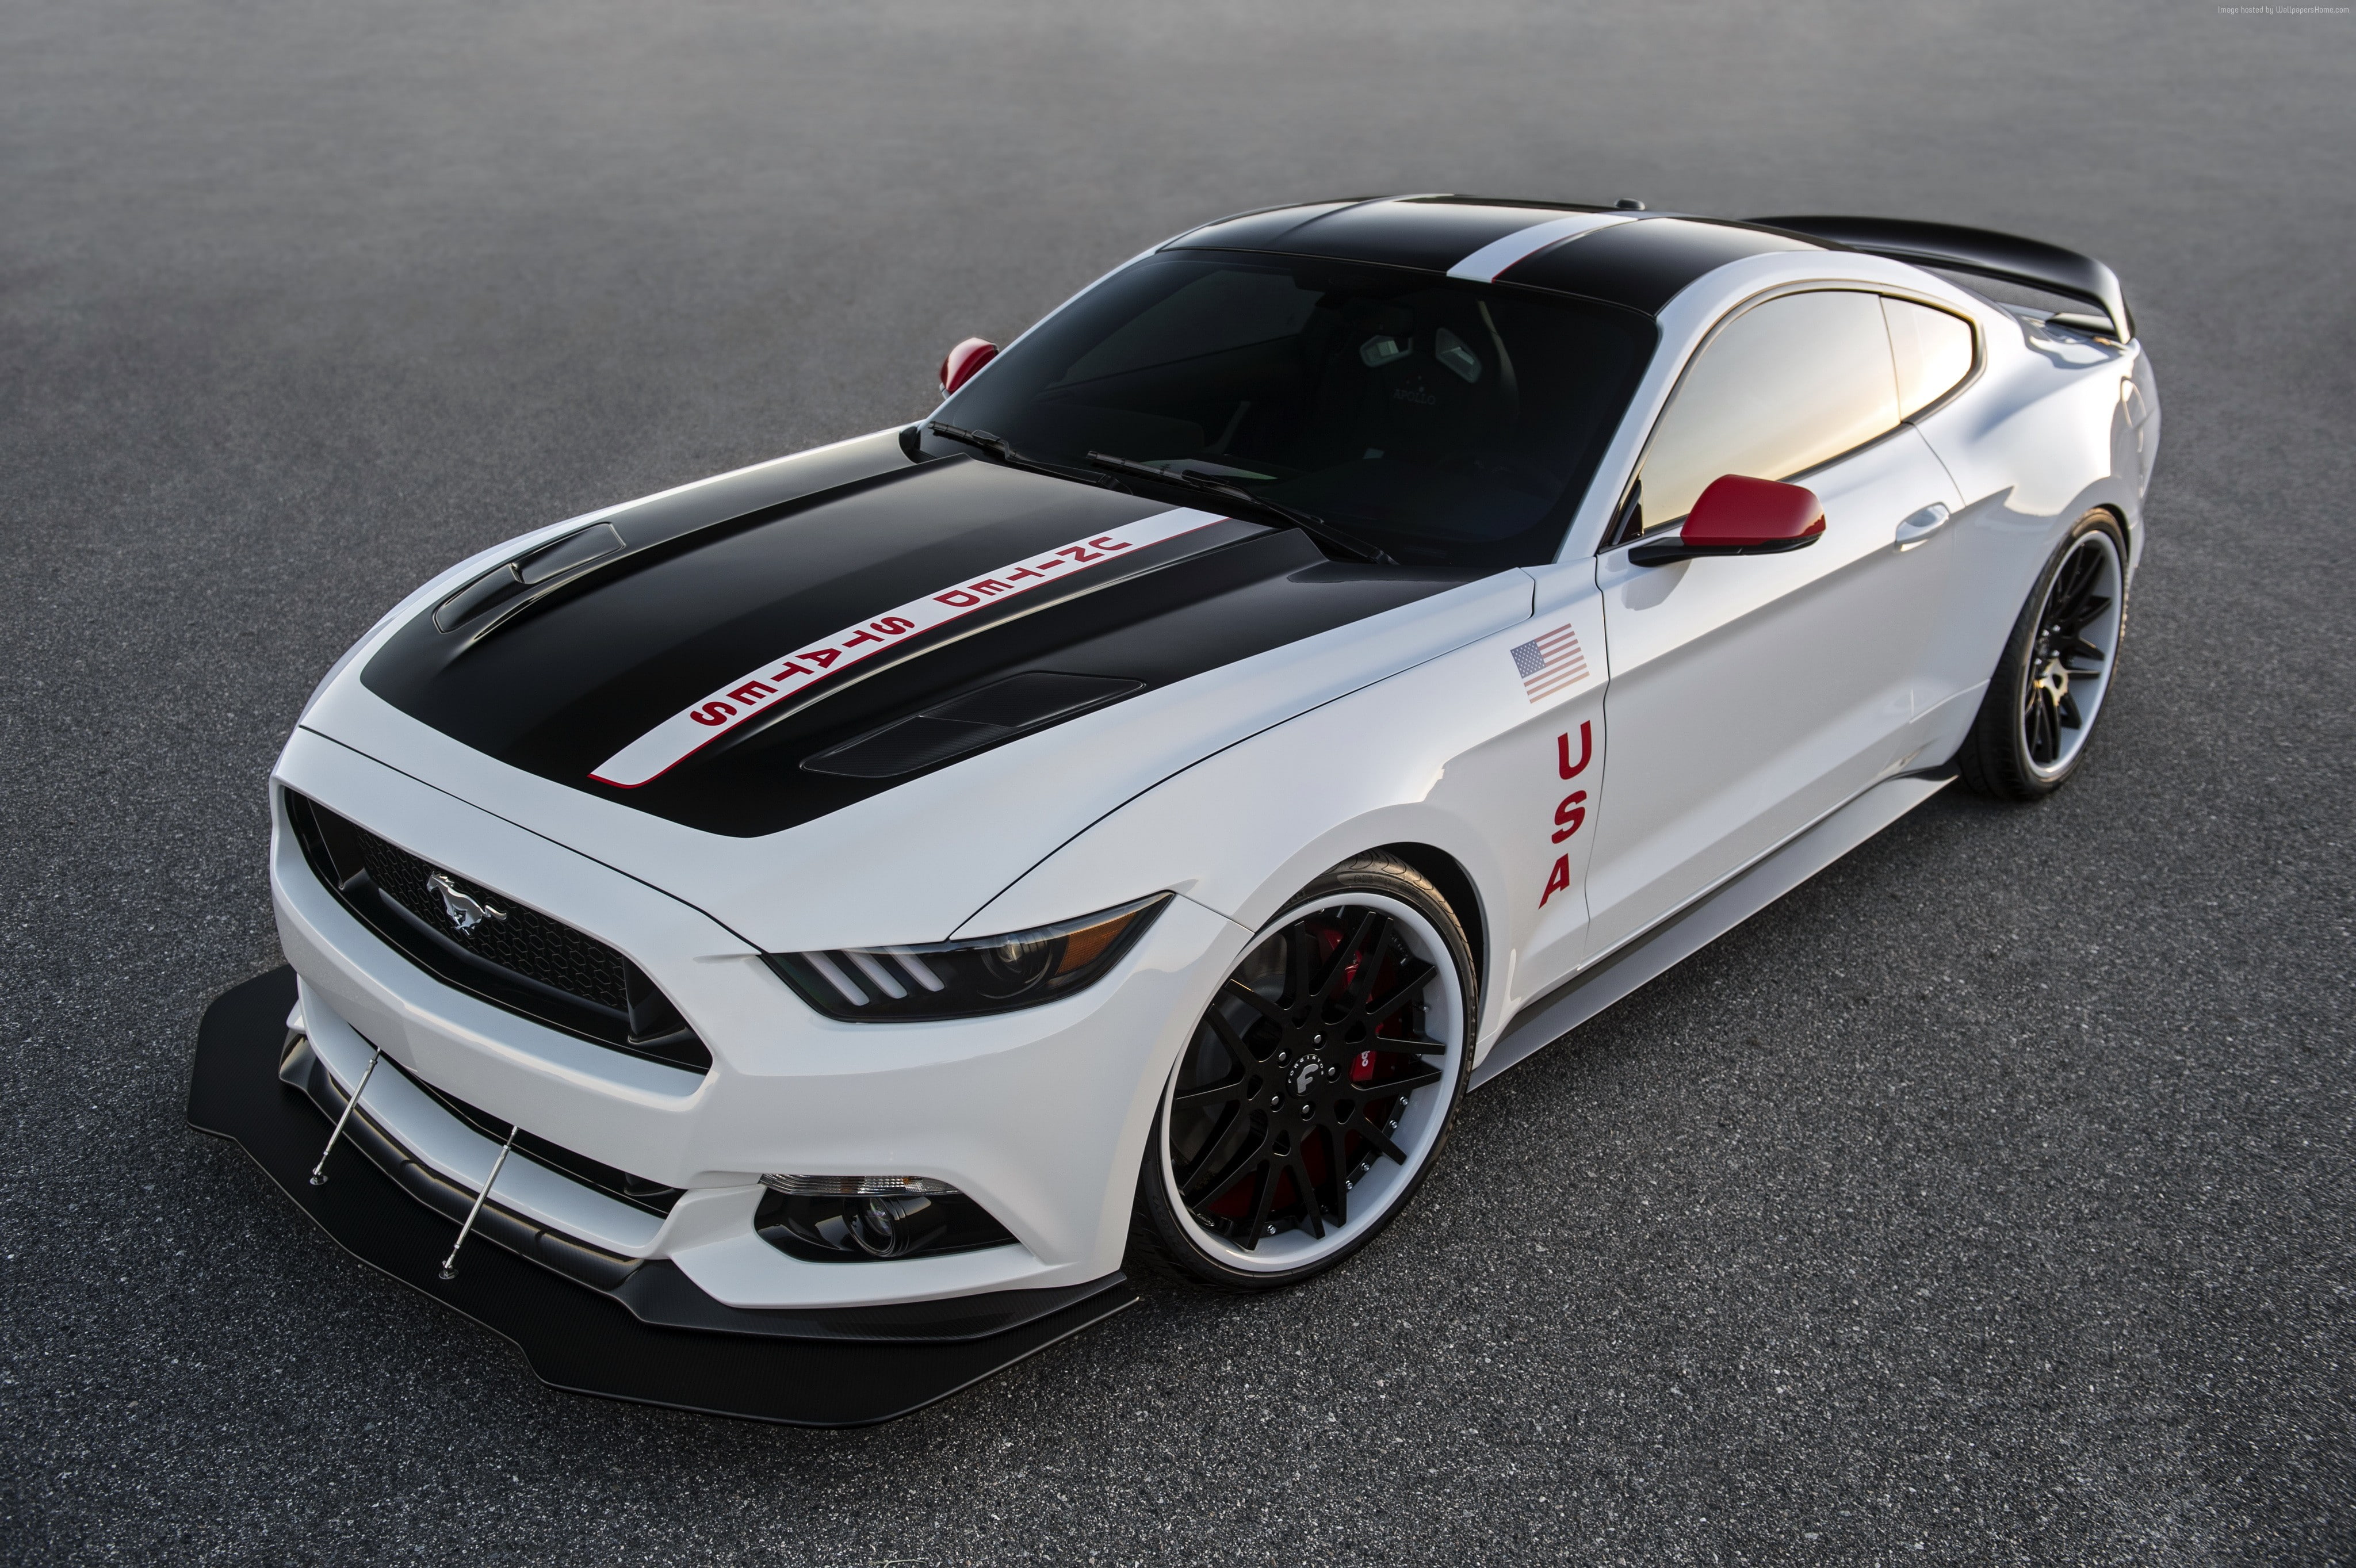 mustang, sport cars, white, Ford Mustang Apollo Edition, transportation